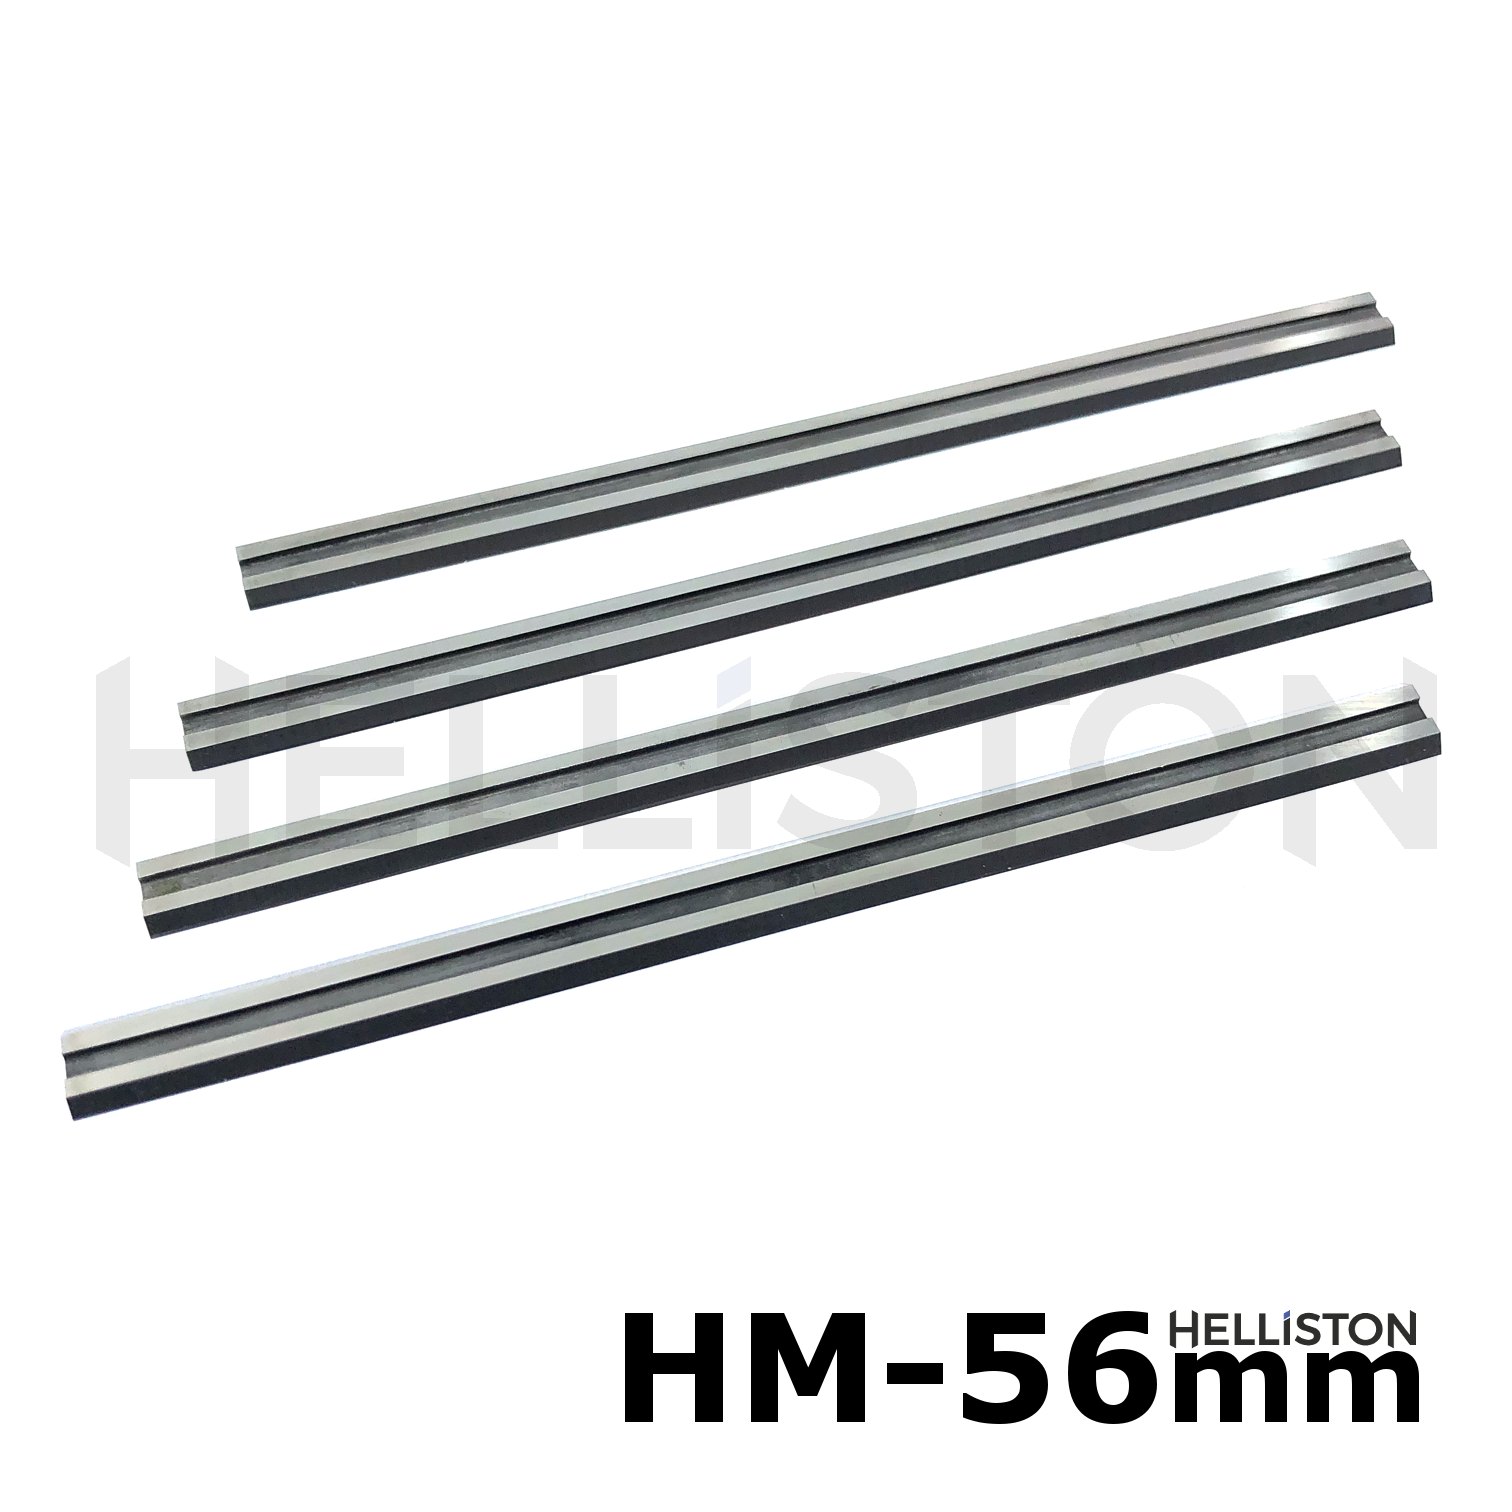 HM TCT Planer Blades, Reversible Knives 56 mm, hard metal (Tungsten Carbide), double-sided blades for electrical hand planersBosch GHO 12V-20, Adler BH 556, Hoffmann BH-556, Wegoma AP98 etc